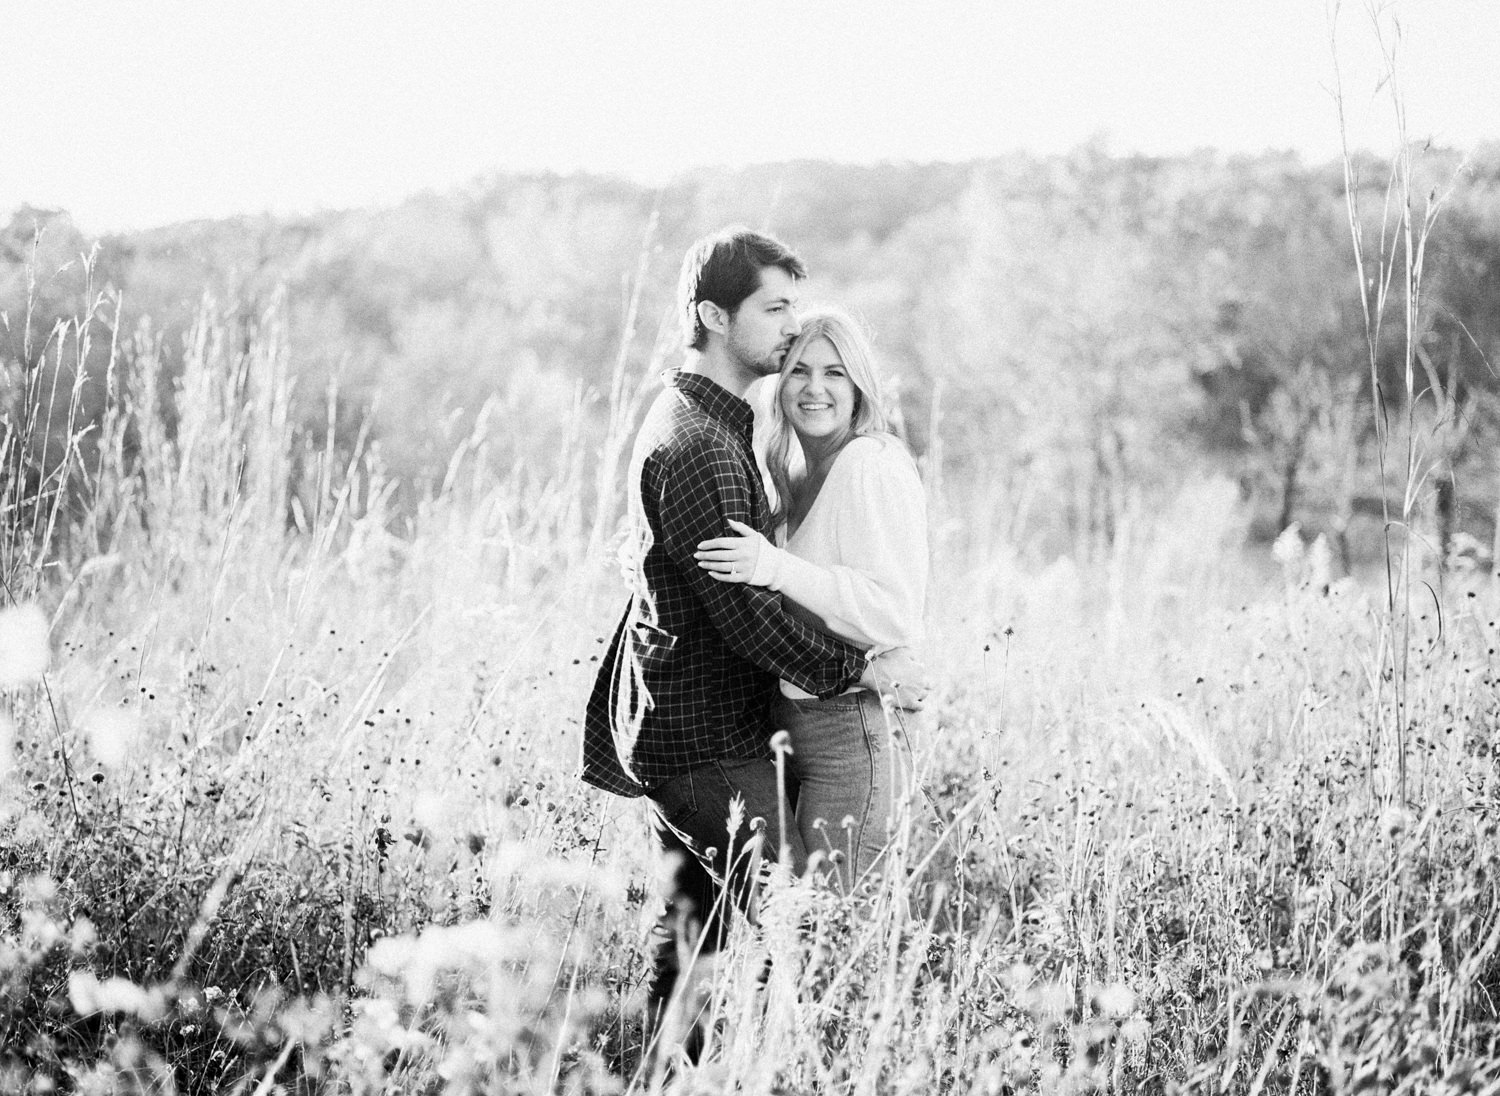 St. Louis engagement and wedding photographer